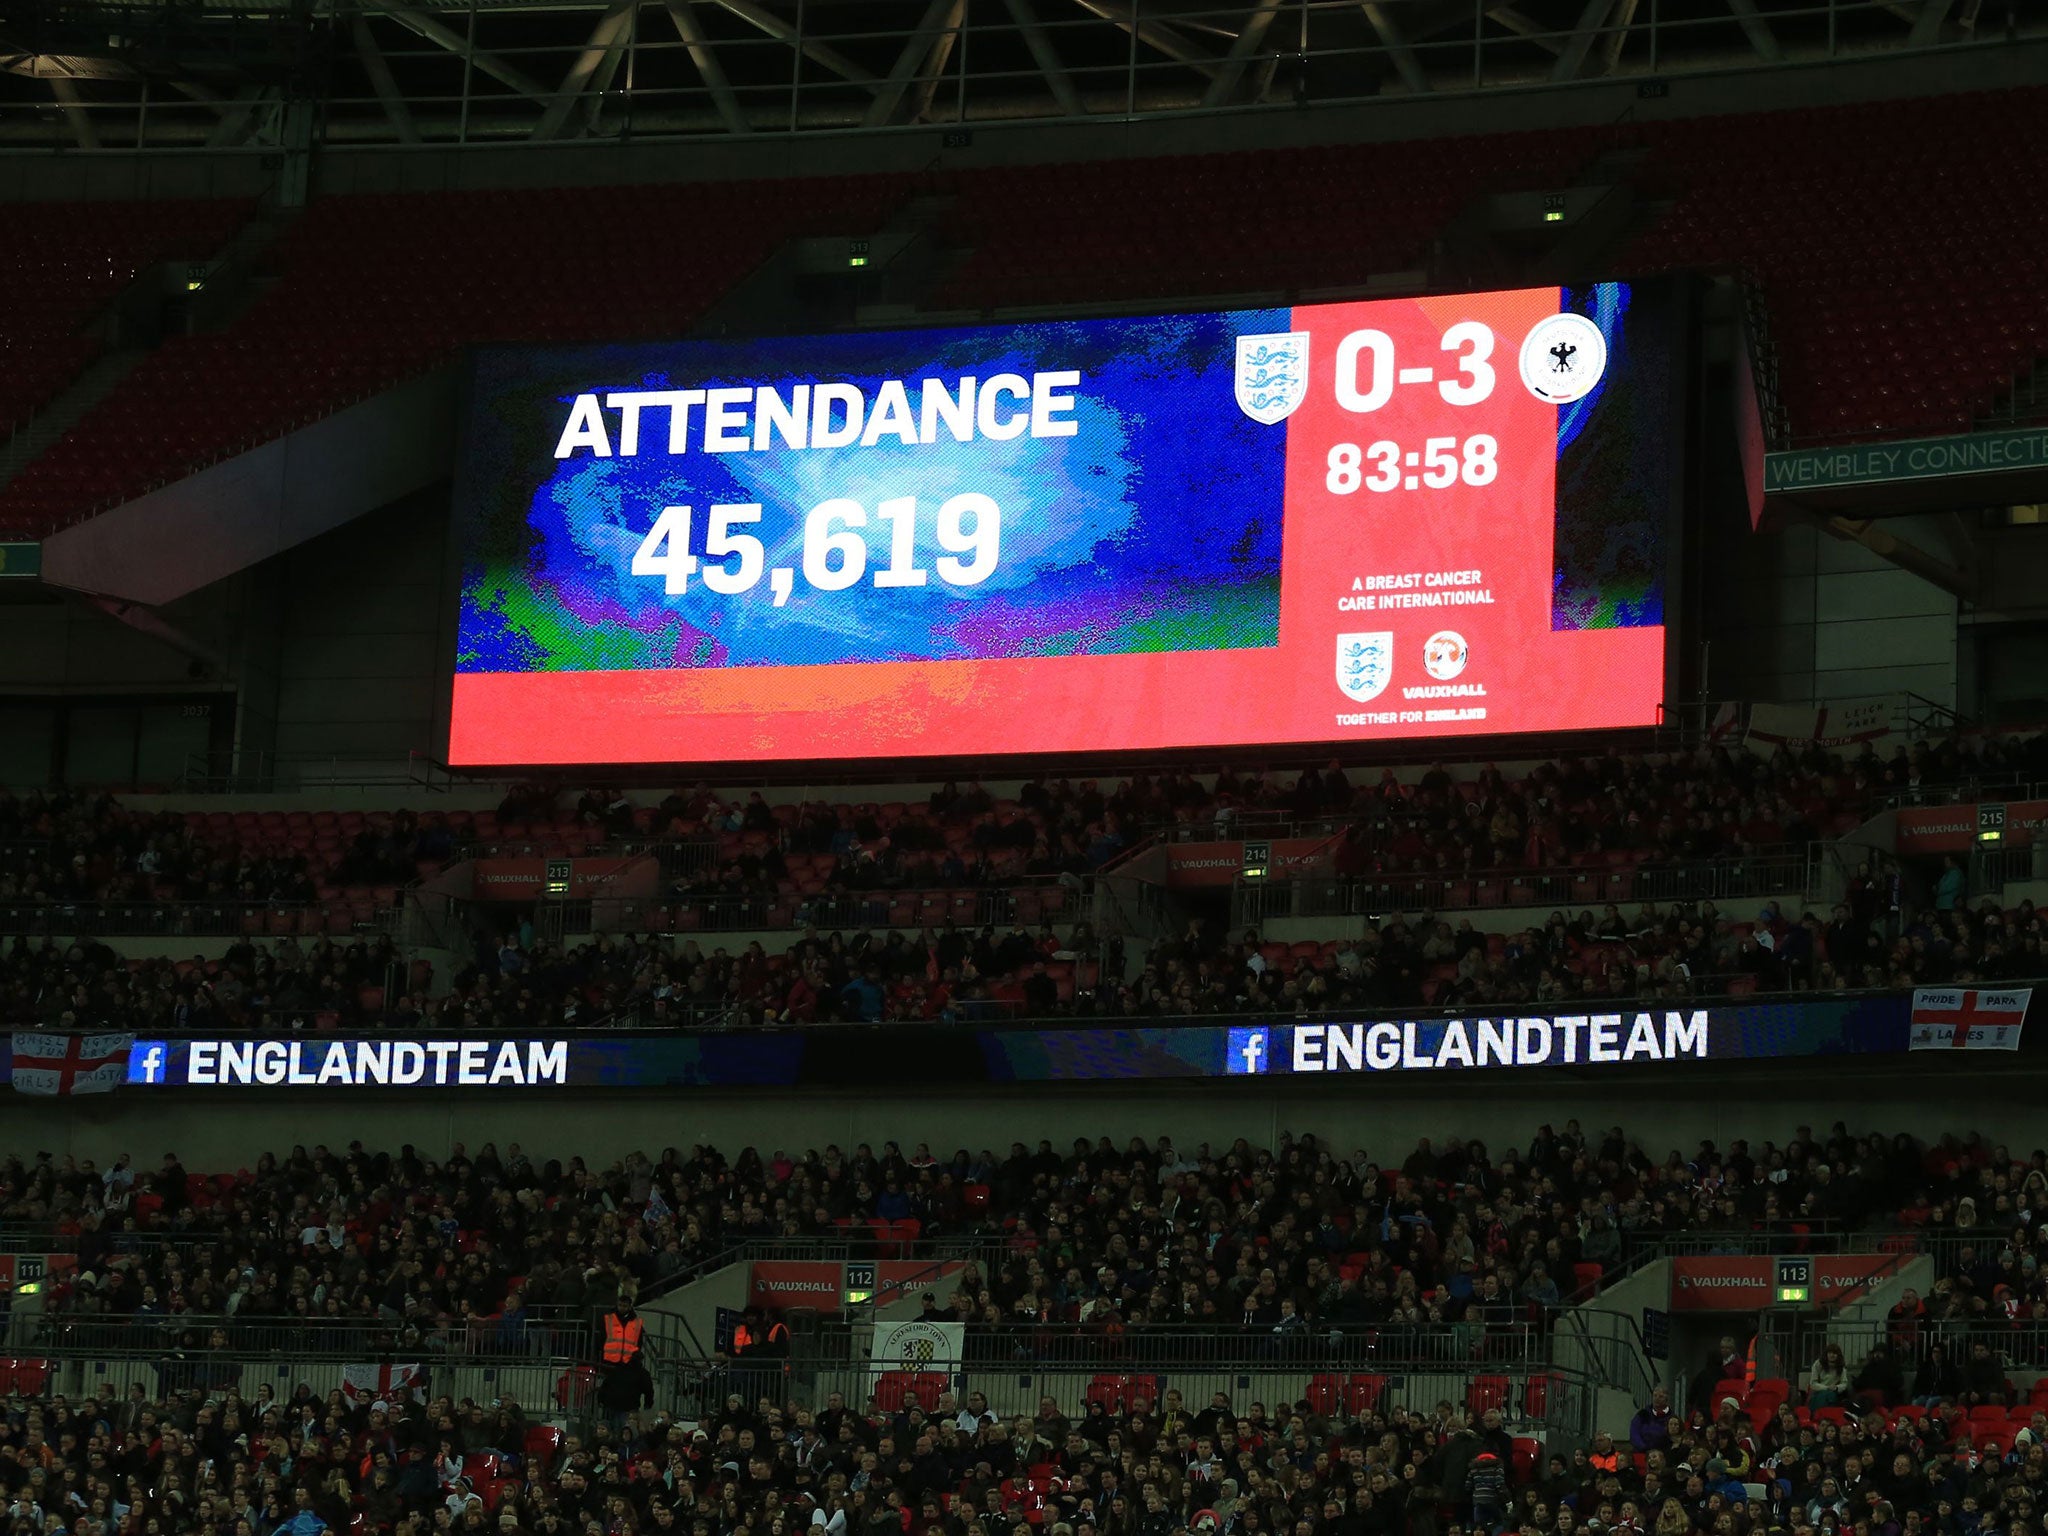 The Wembley screen shows the attendance